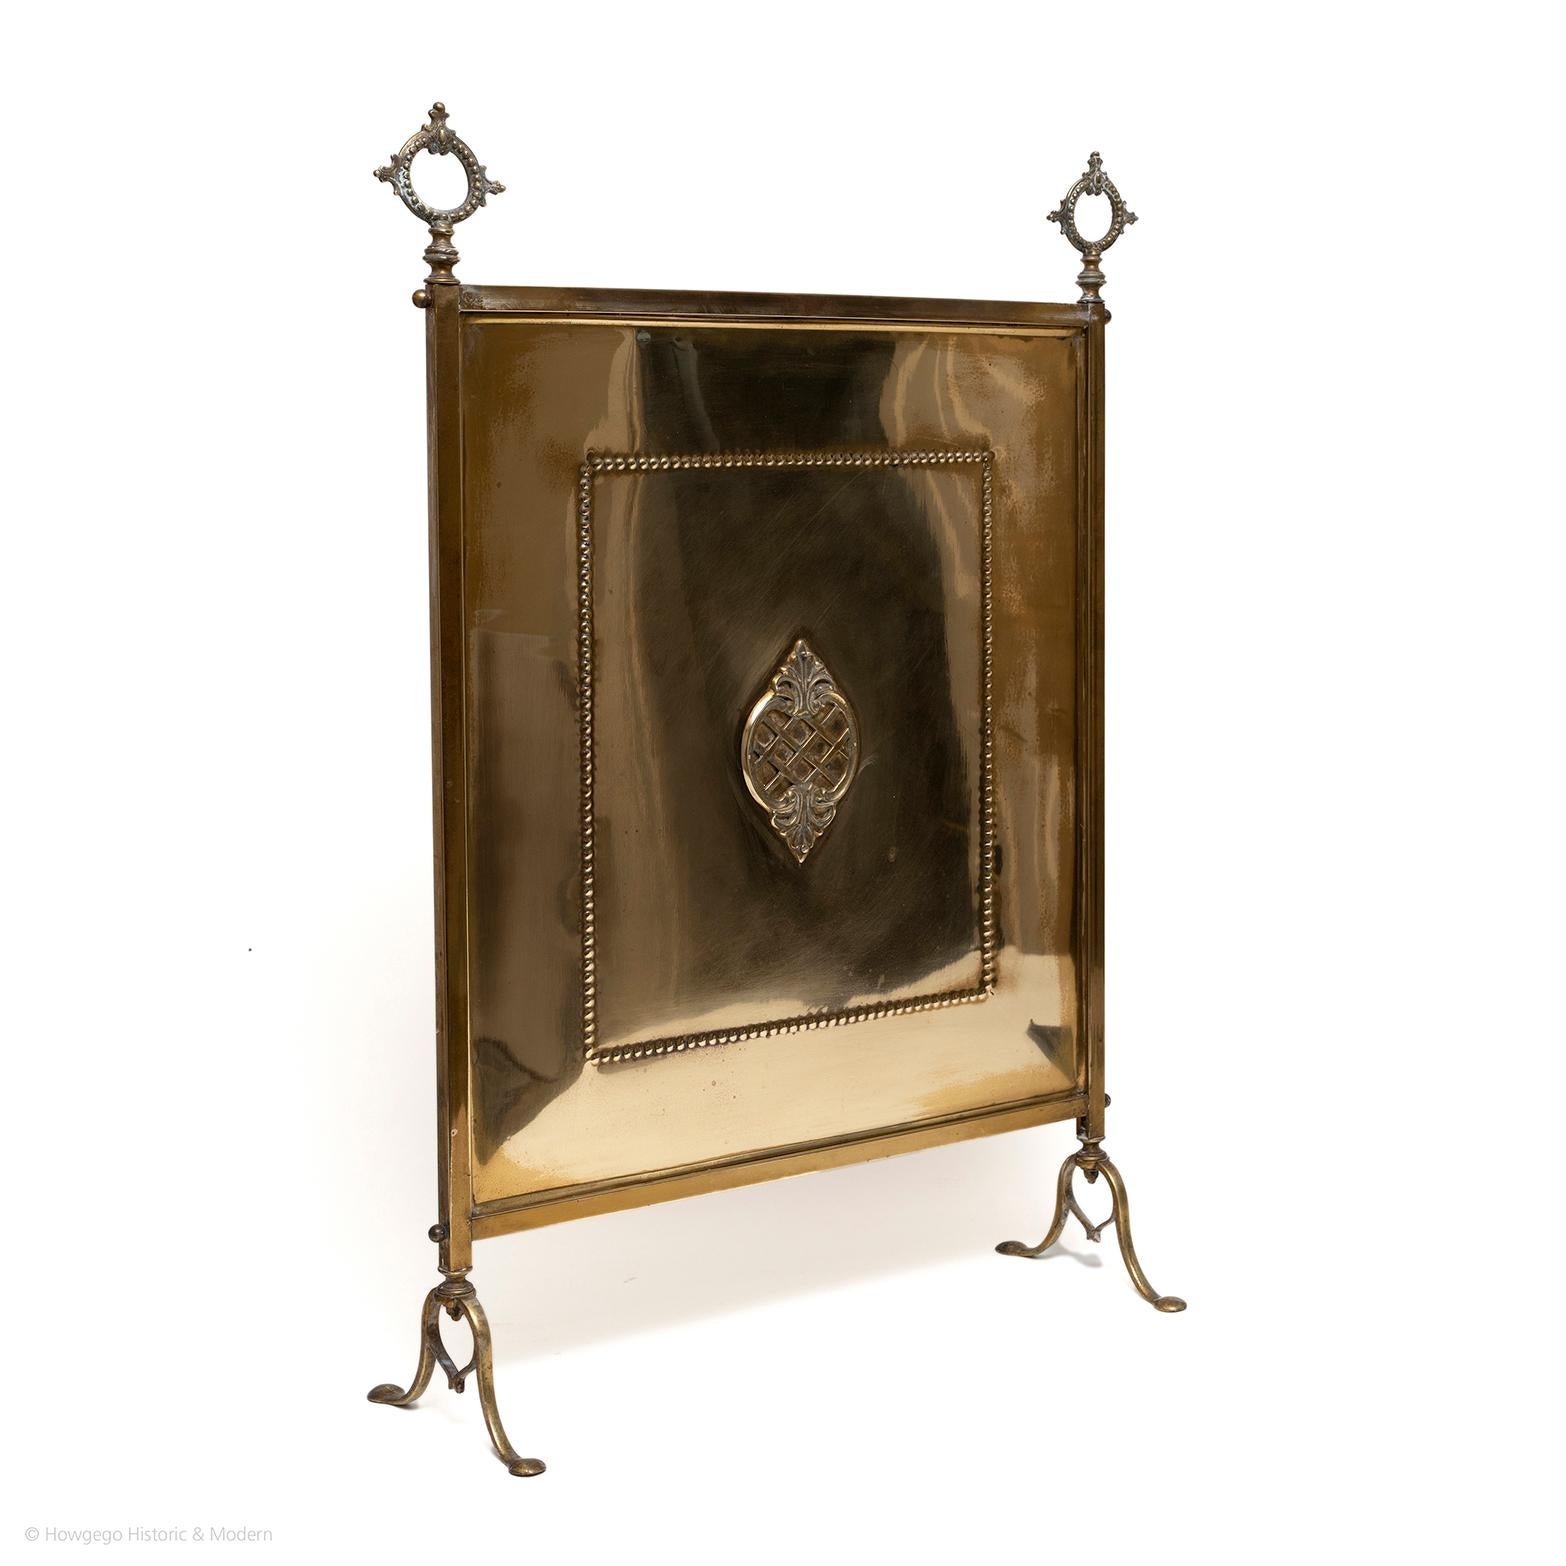 Attractive classical ornamentation creating relief and depth.
The heart motif is a charming feature
The brass amplifies the heat and reflects the light in the room

Two elaborate, decorative brass finials acting as carrying handles. Decorated